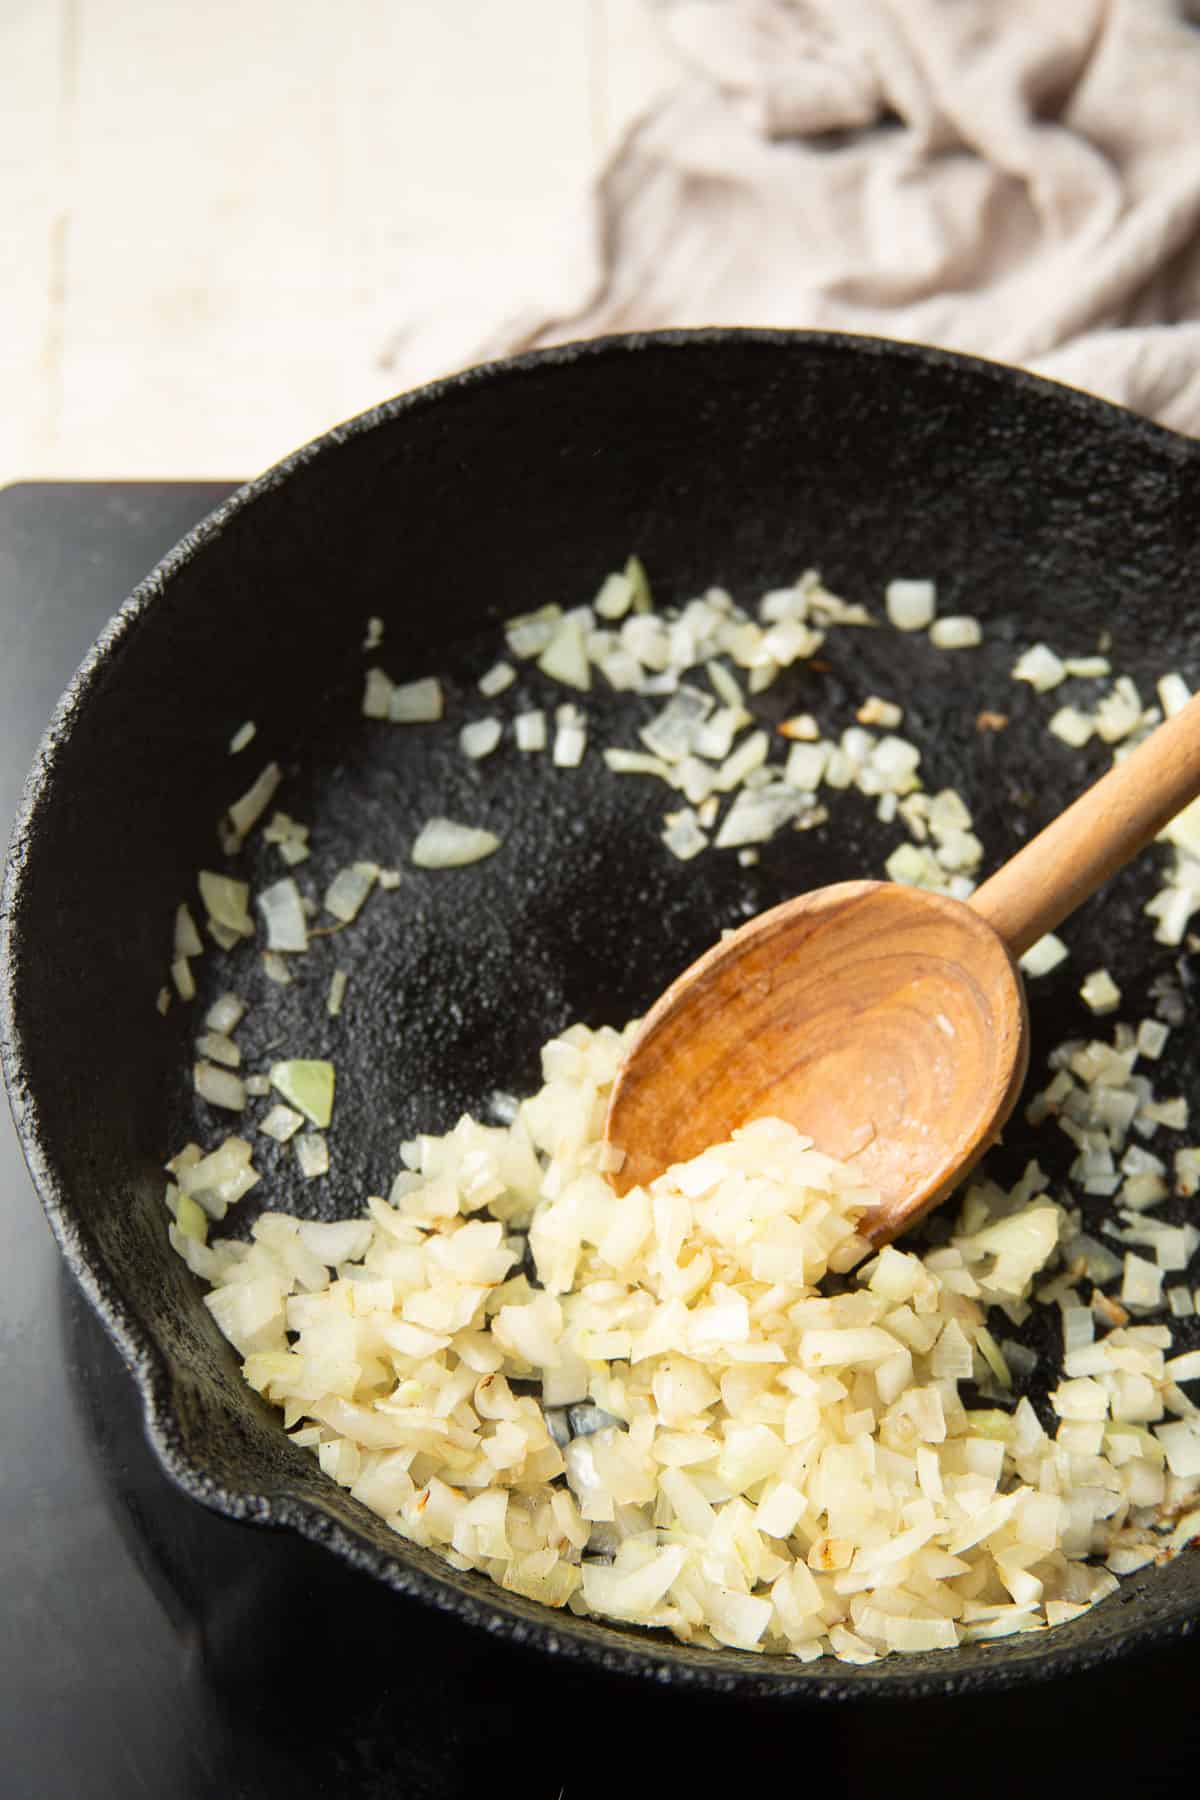 Diced onion cooking in a skillet.